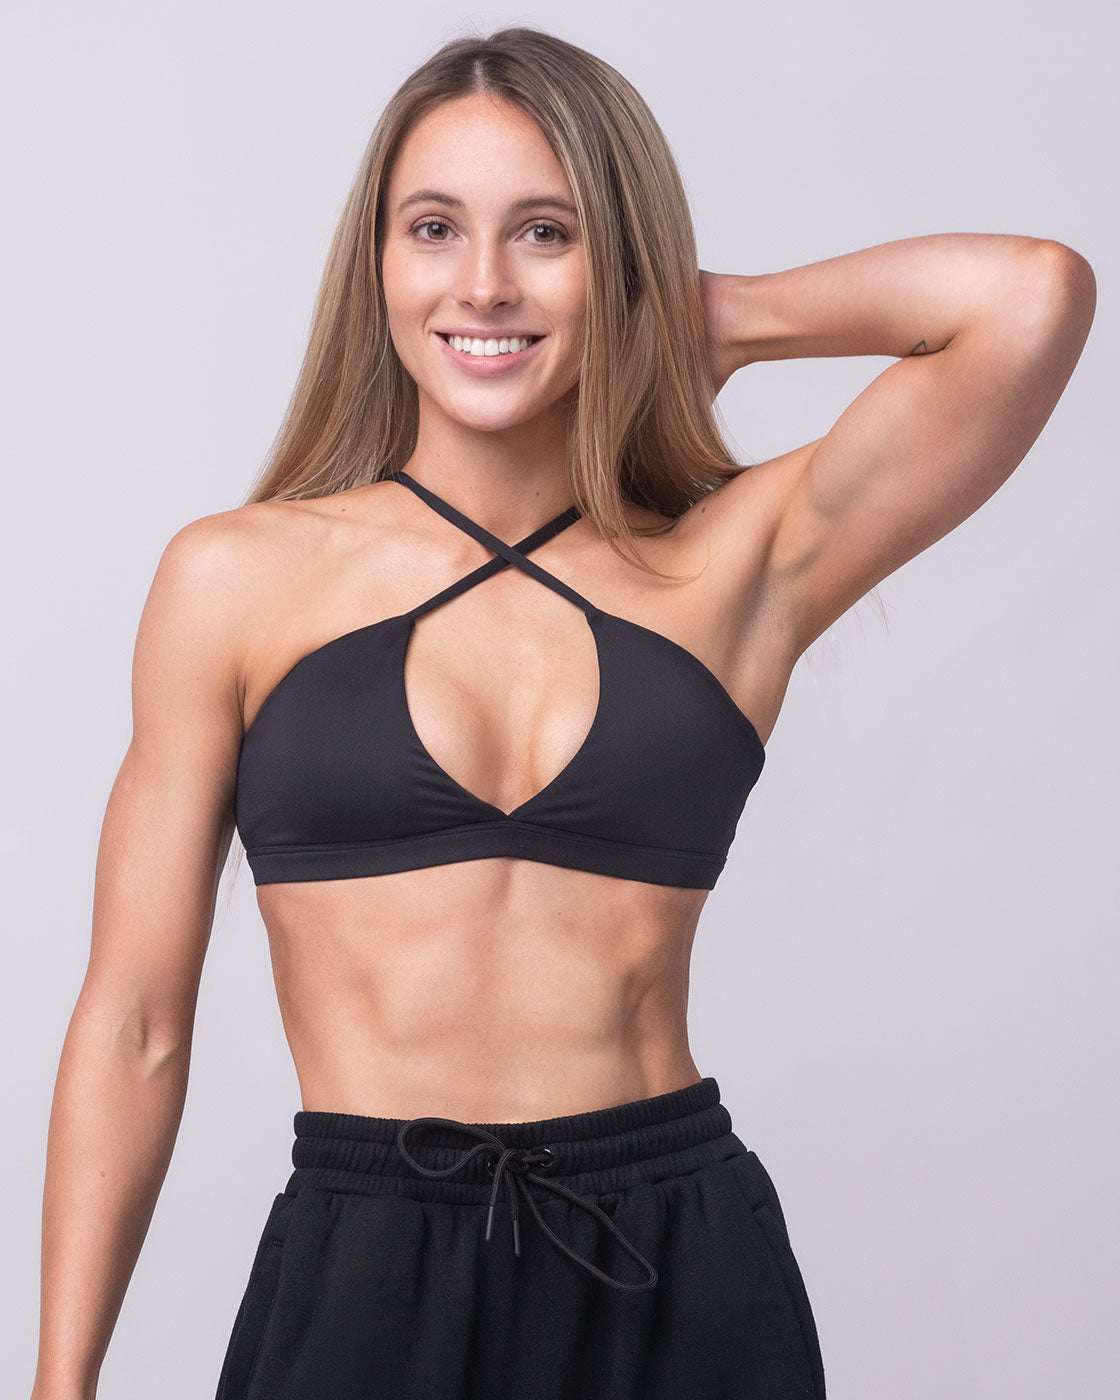 I violated the dress code at 404 Lafayette gym by wearing a sports bra